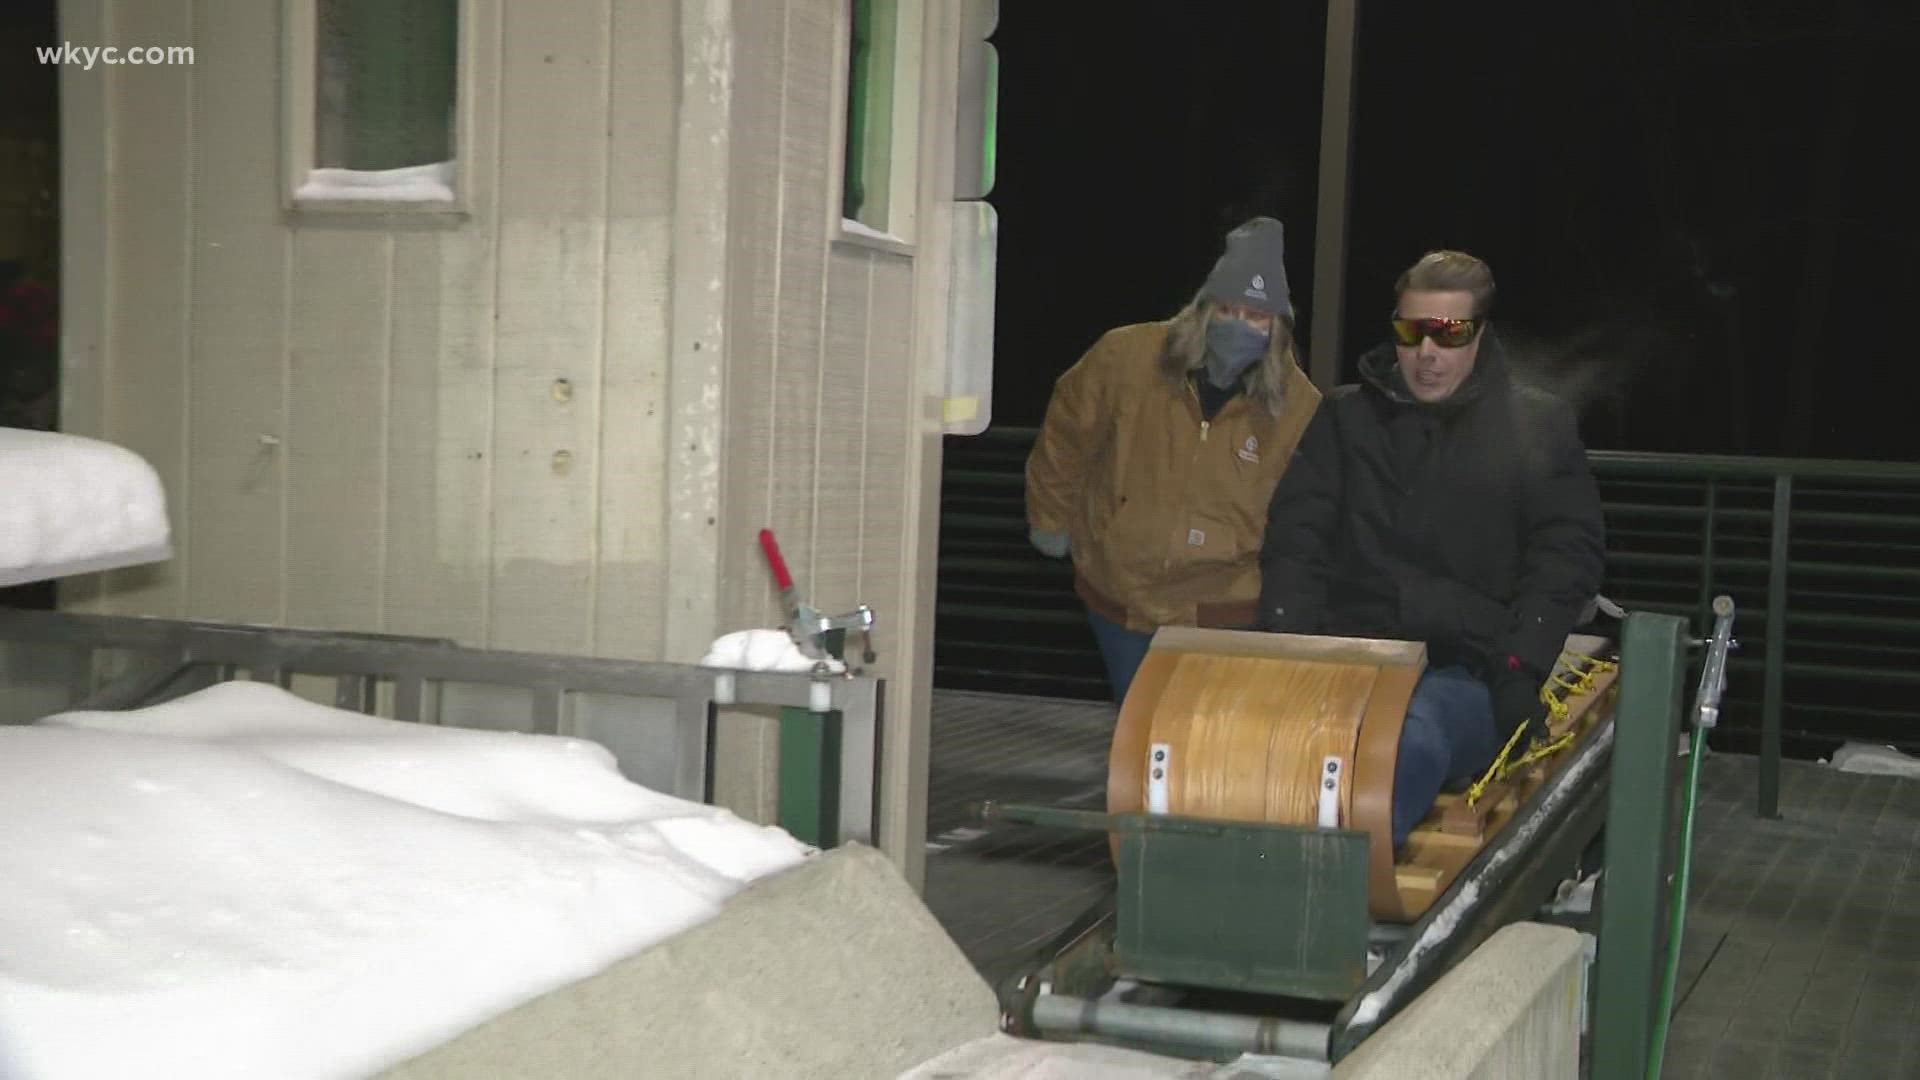 Now THIS is fun. We sent 3News' Austin Love to the Strongsville Toboggan Chutes and Chalet for a wintry ride.